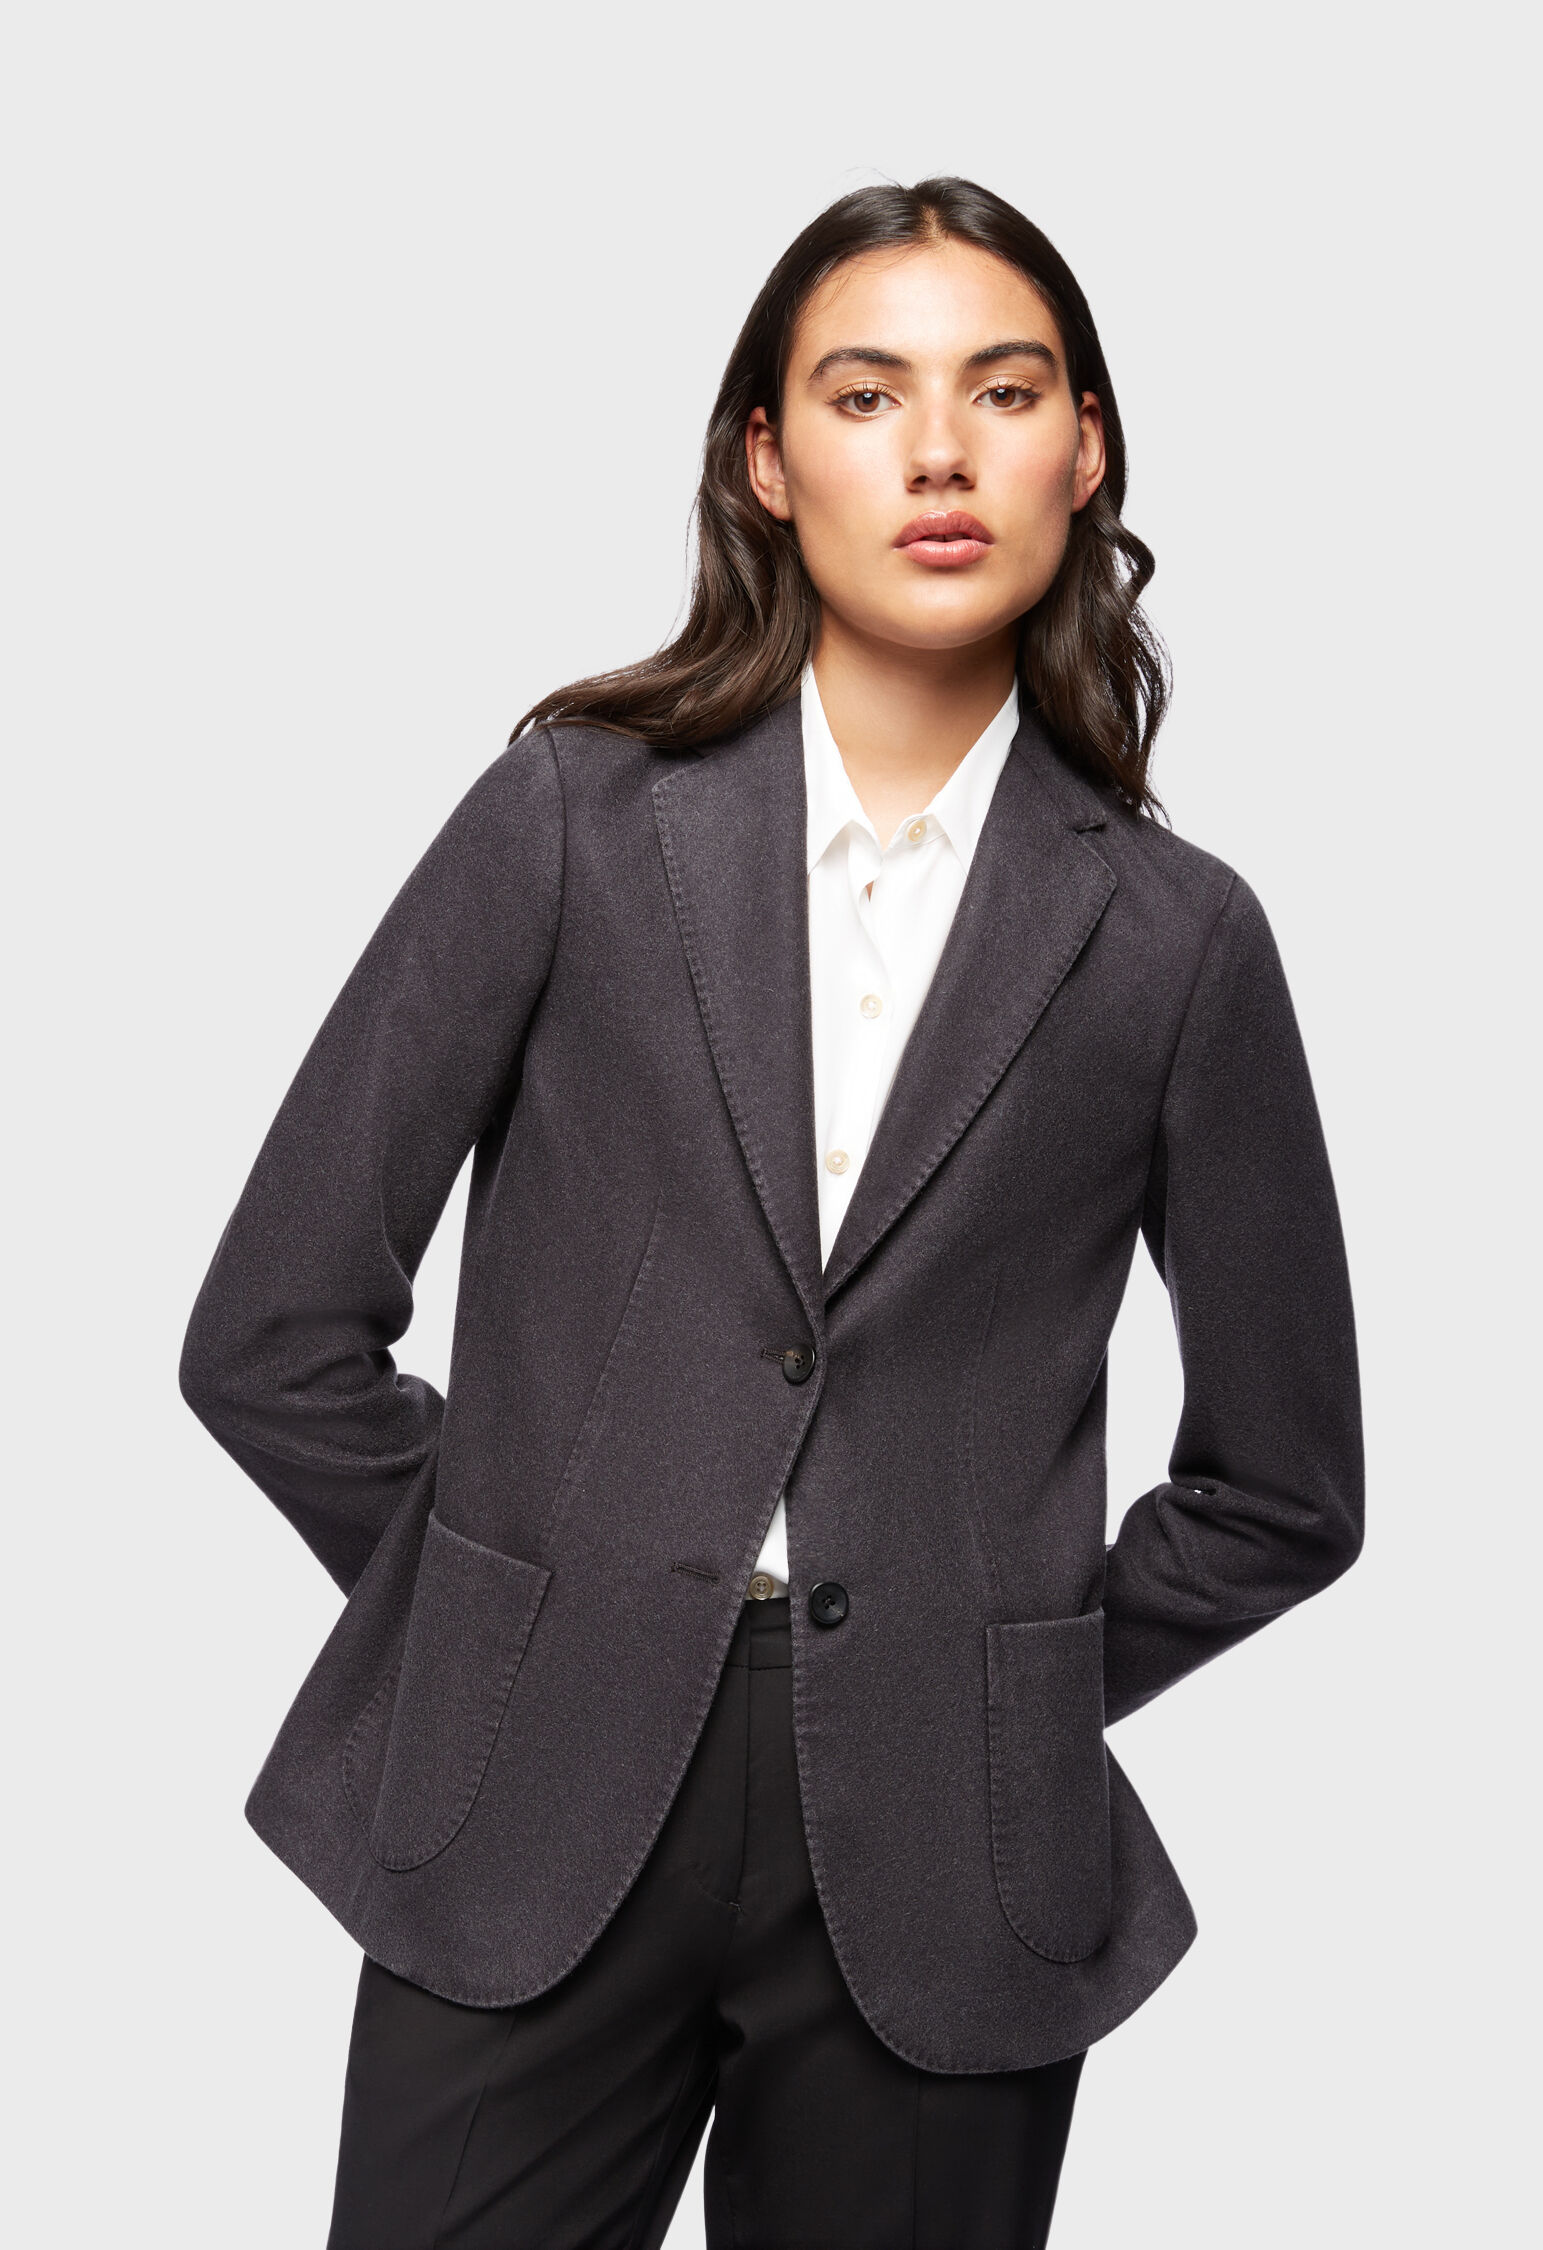 Zara 100% CASHMERE JACKET LIMITED EDITION | Mall of America®